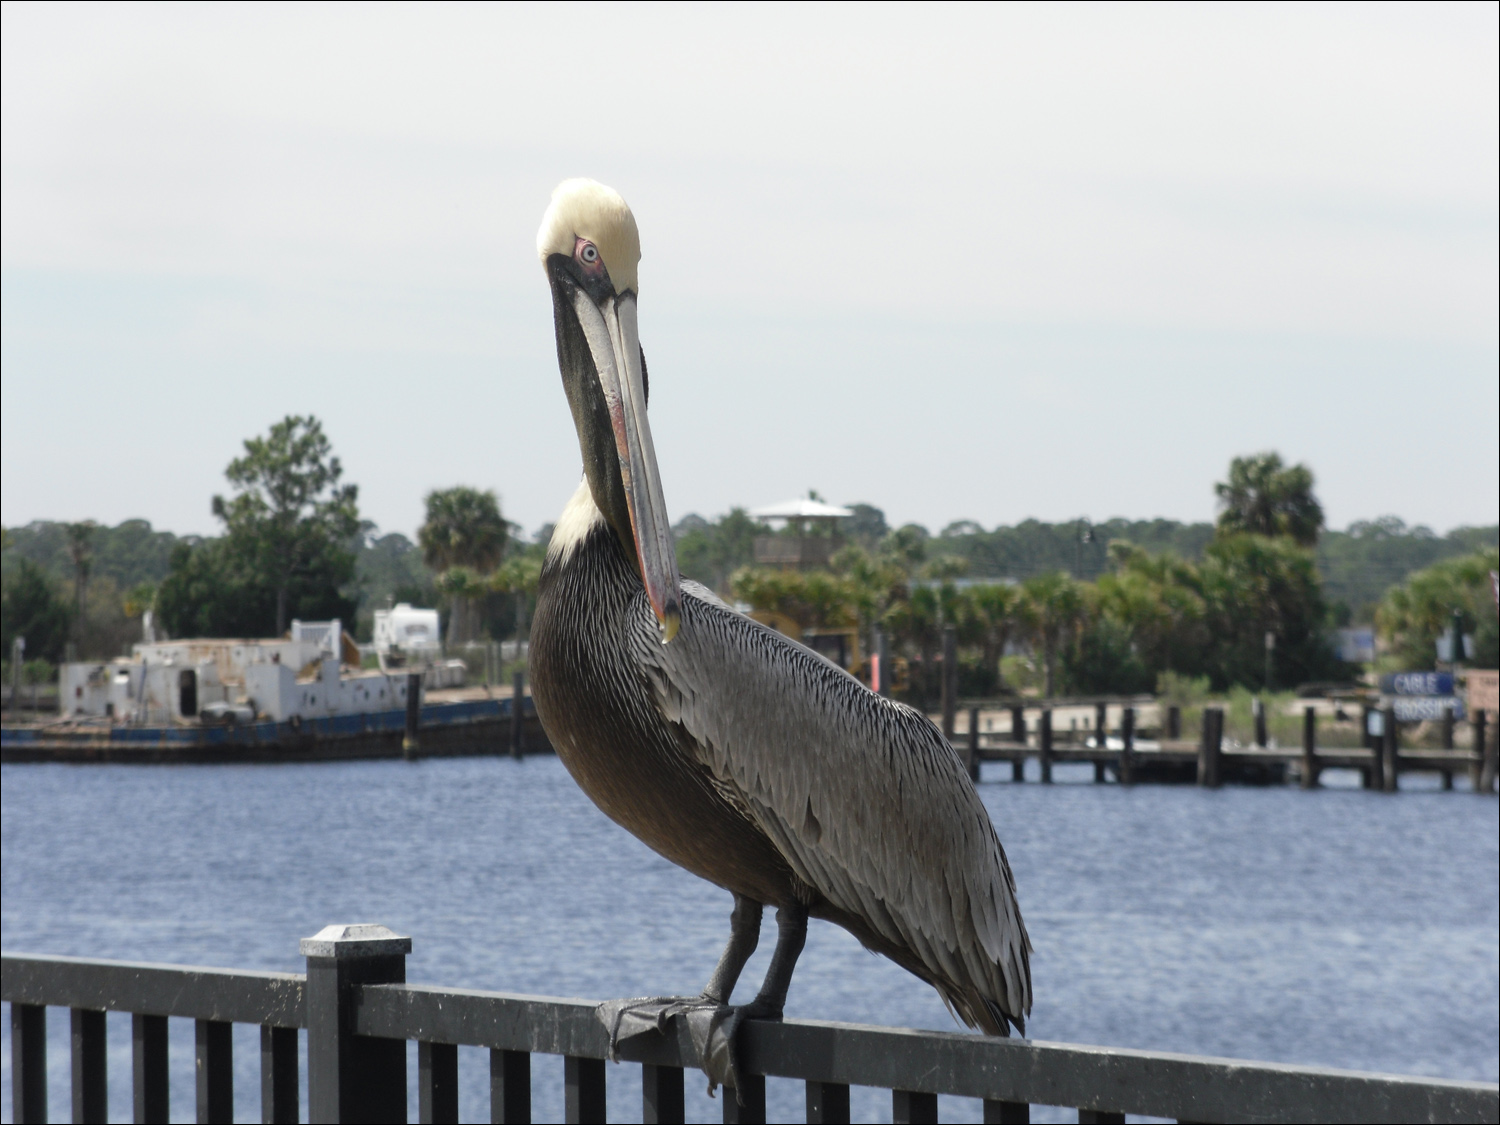 Pelican at the Carabelle, FL marina